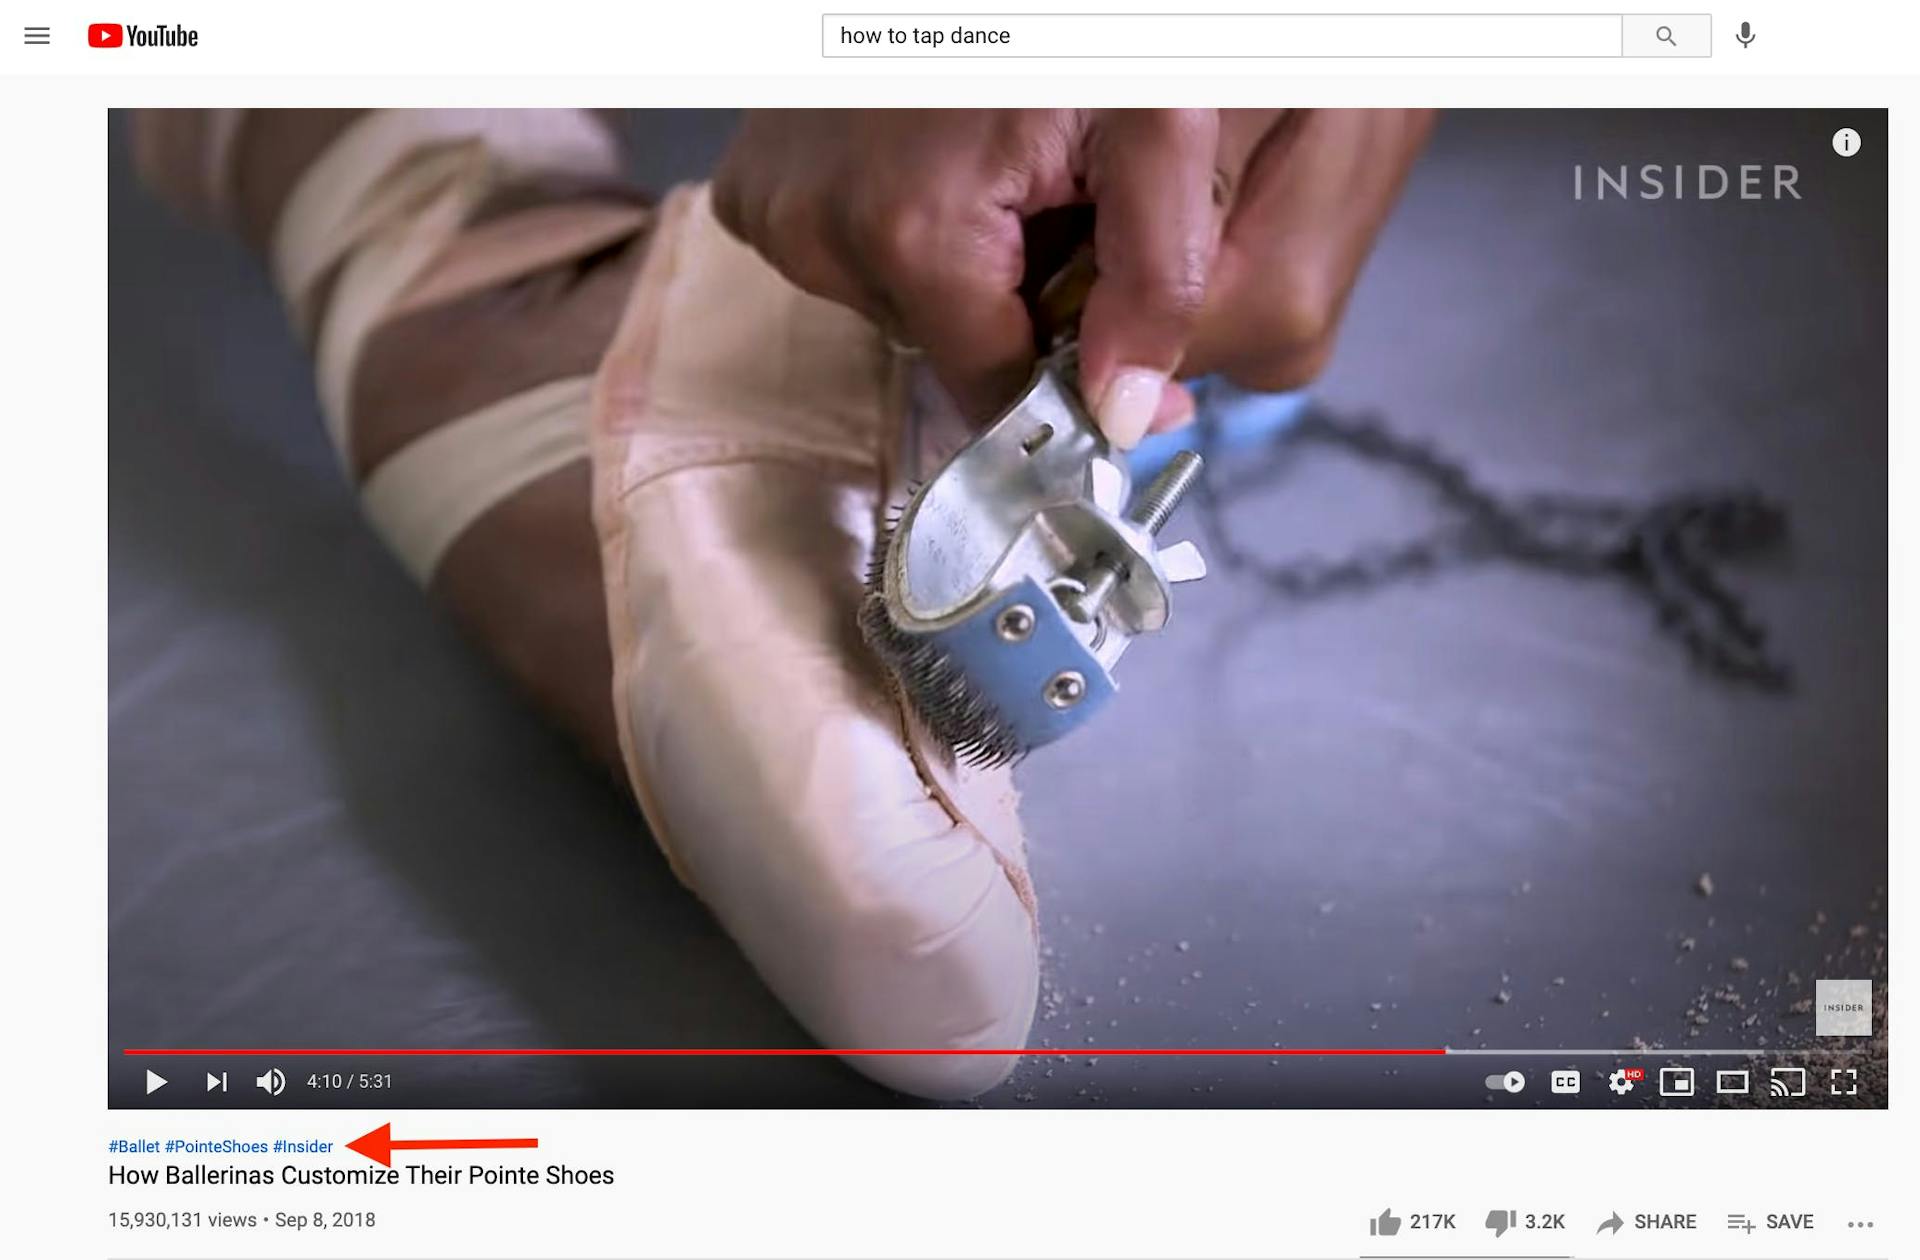 Video three quarters of the way through showing a ballerina customizing pointe shoes. Video is tagged with hashtags to help show up in YouTube search results.